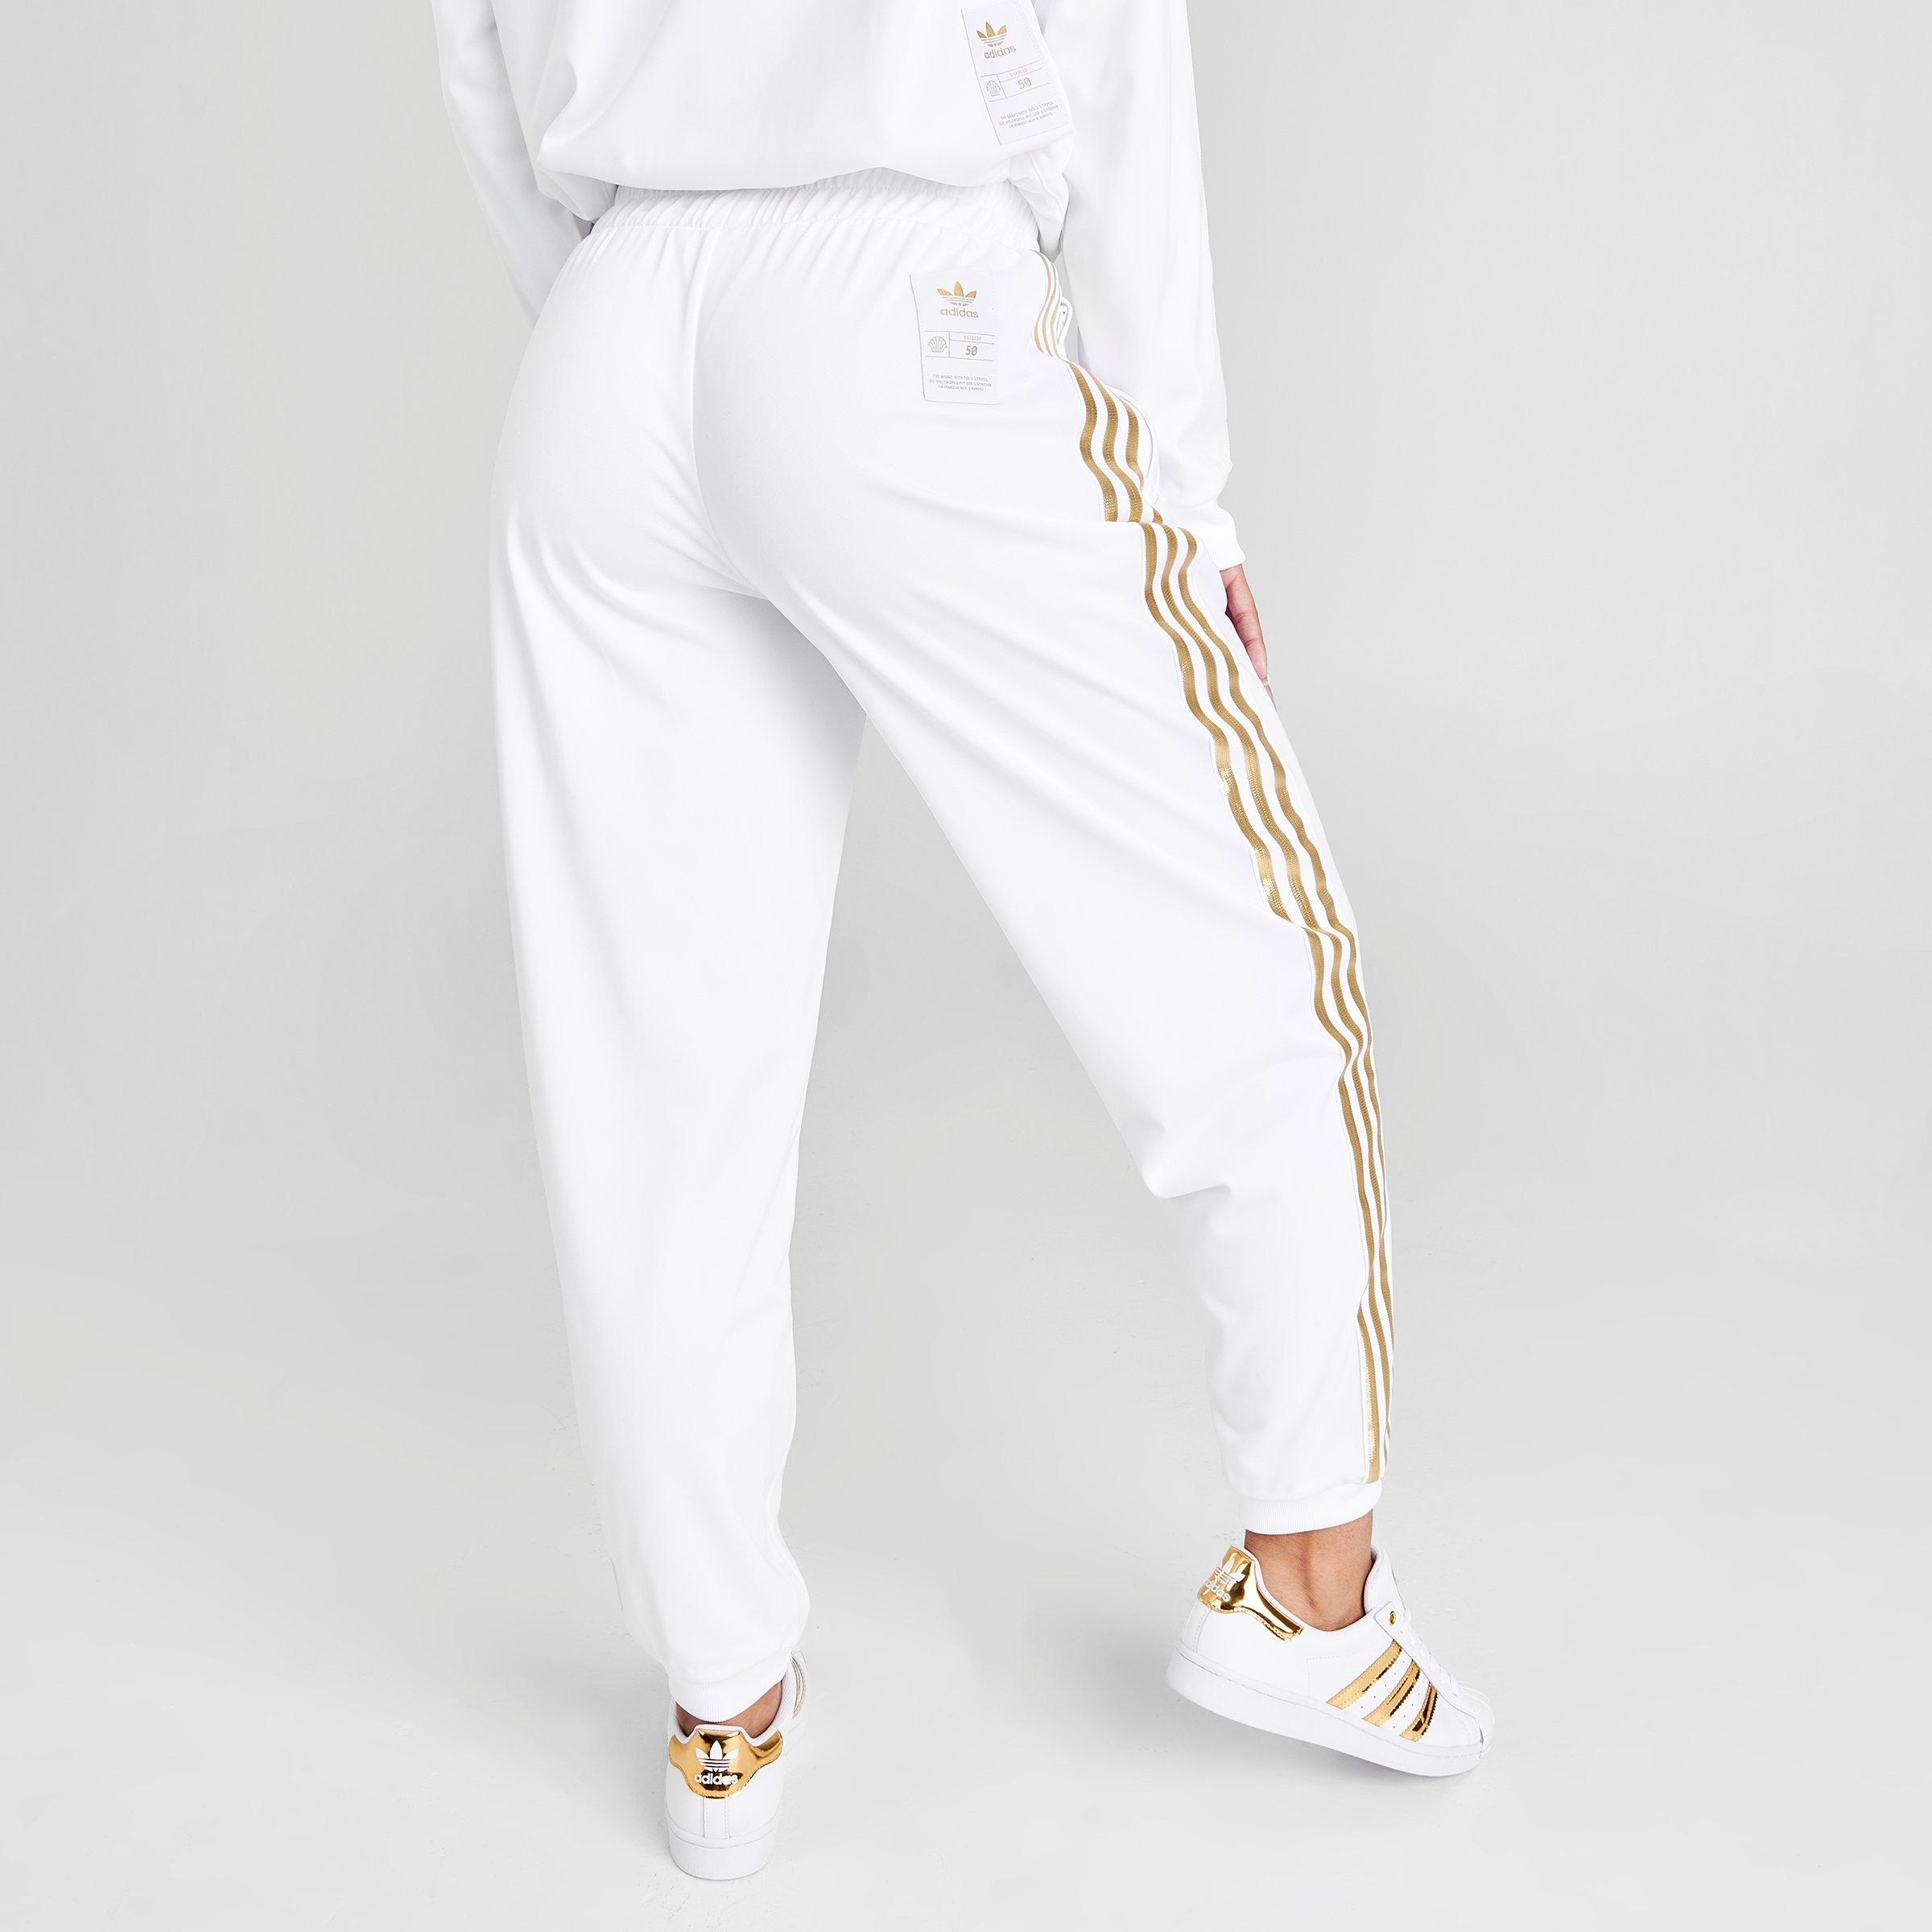 white and gold adidas tracksuit